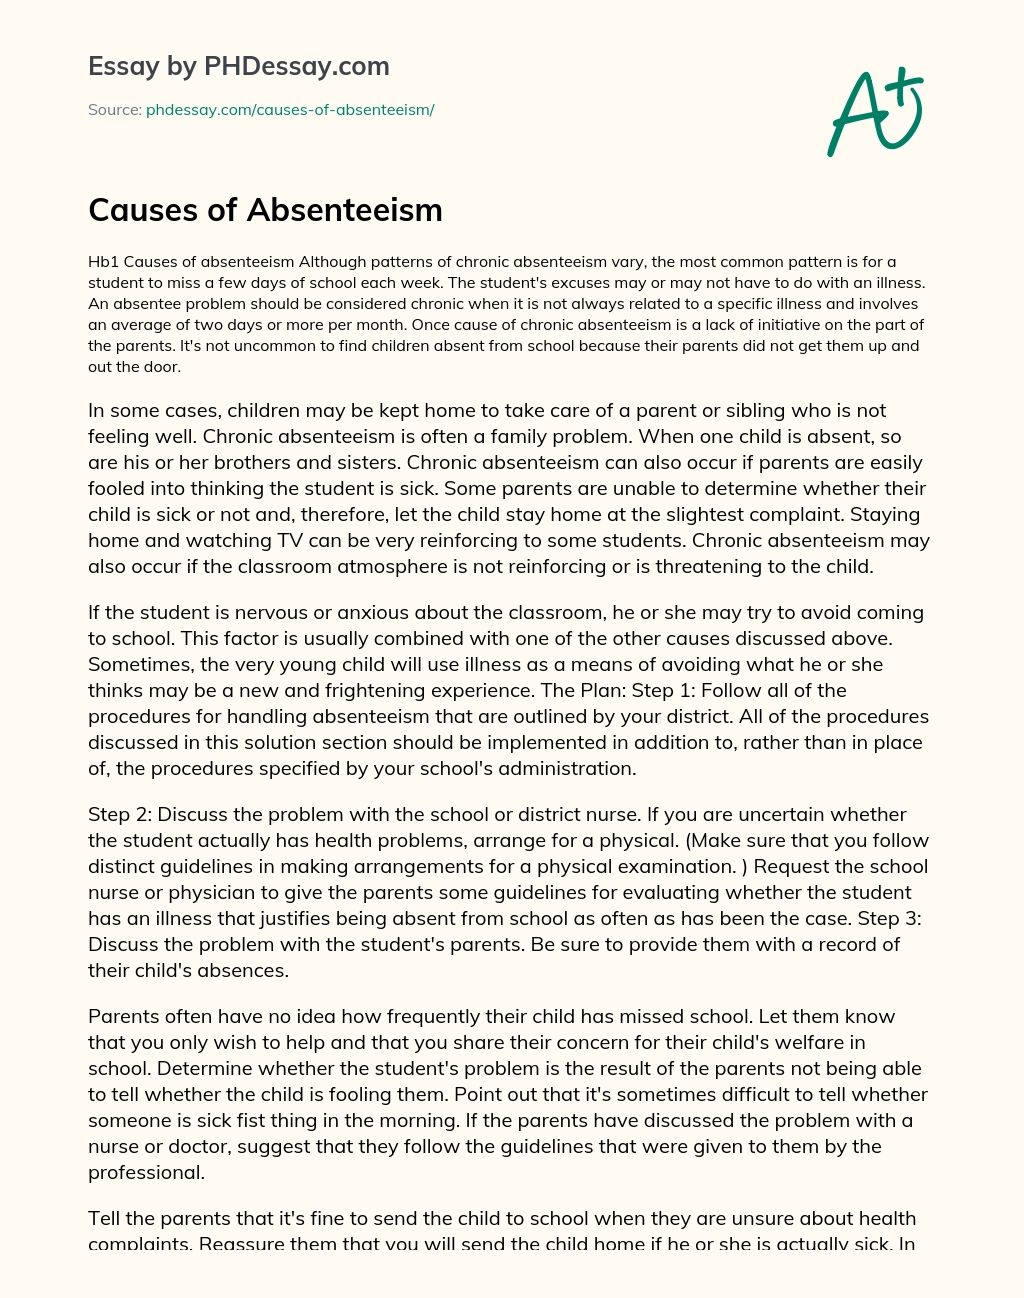 Causes of Absenteeism essay